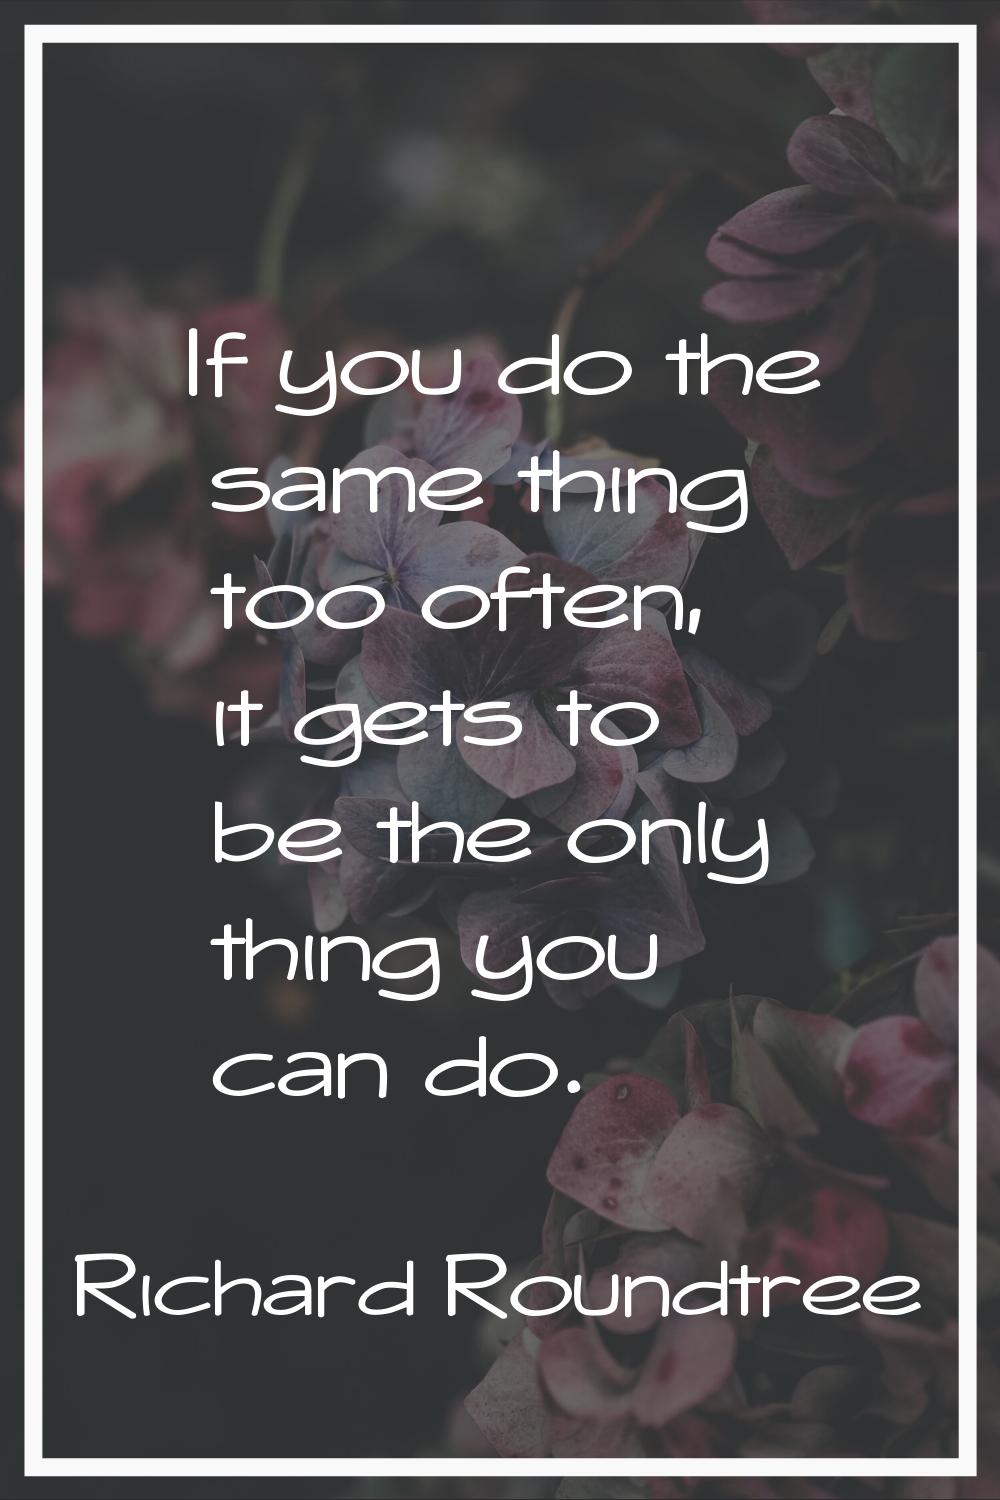 If you do the same thing too often, it gets to be the only thing you can do.